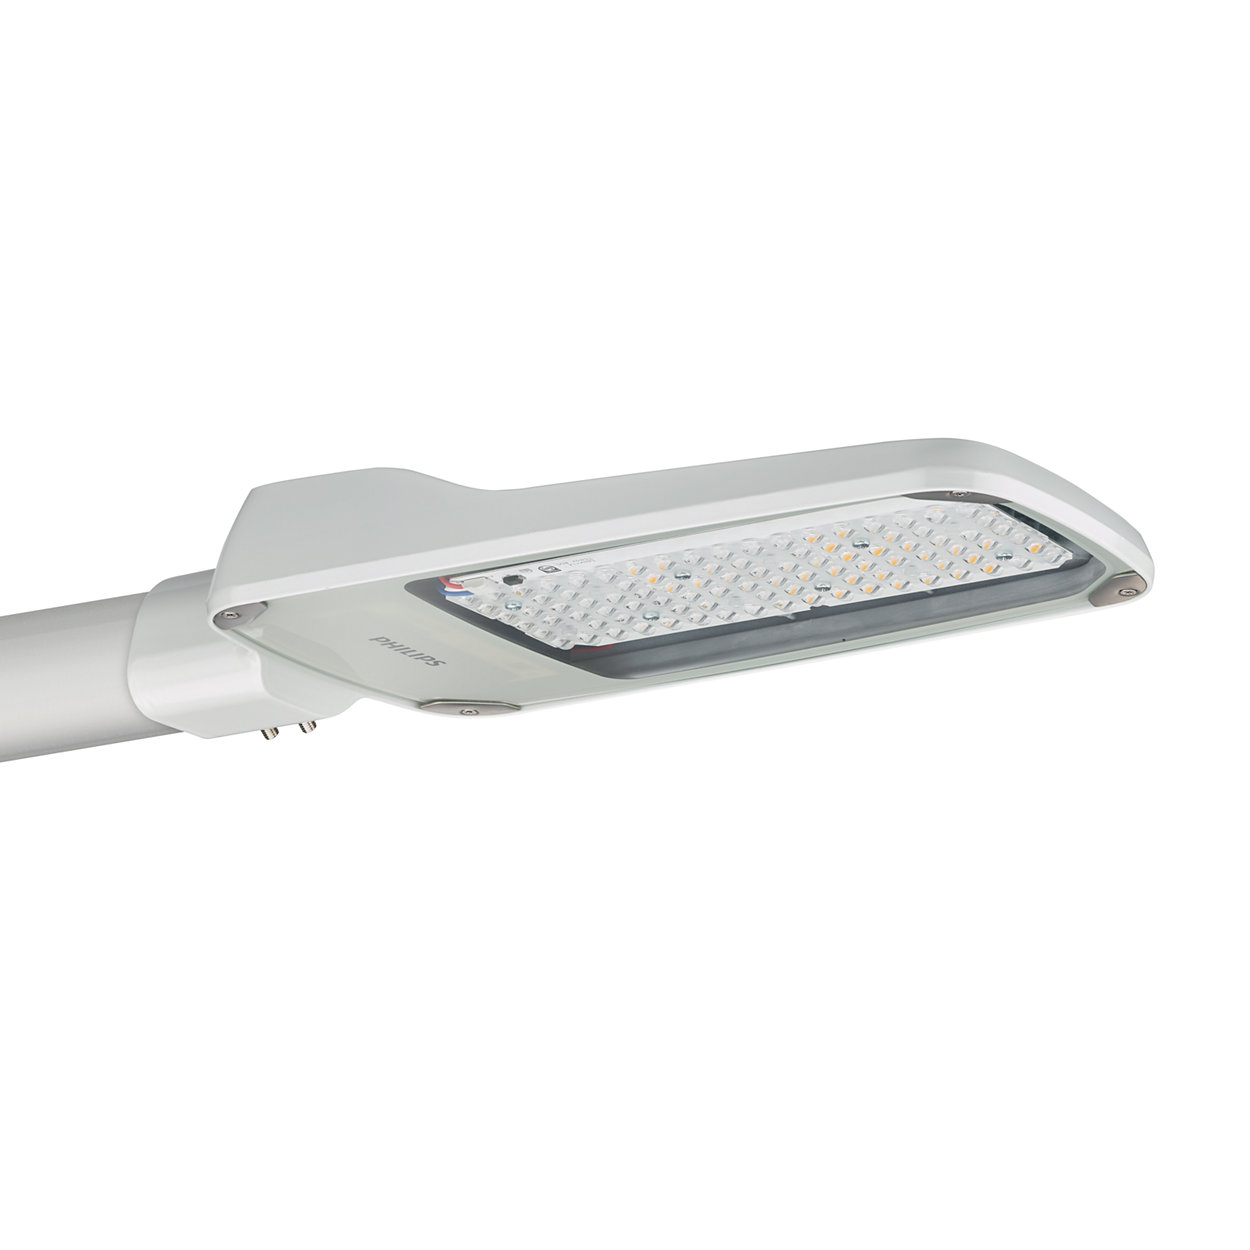 For every project where light really matters, simply efficient street lighting